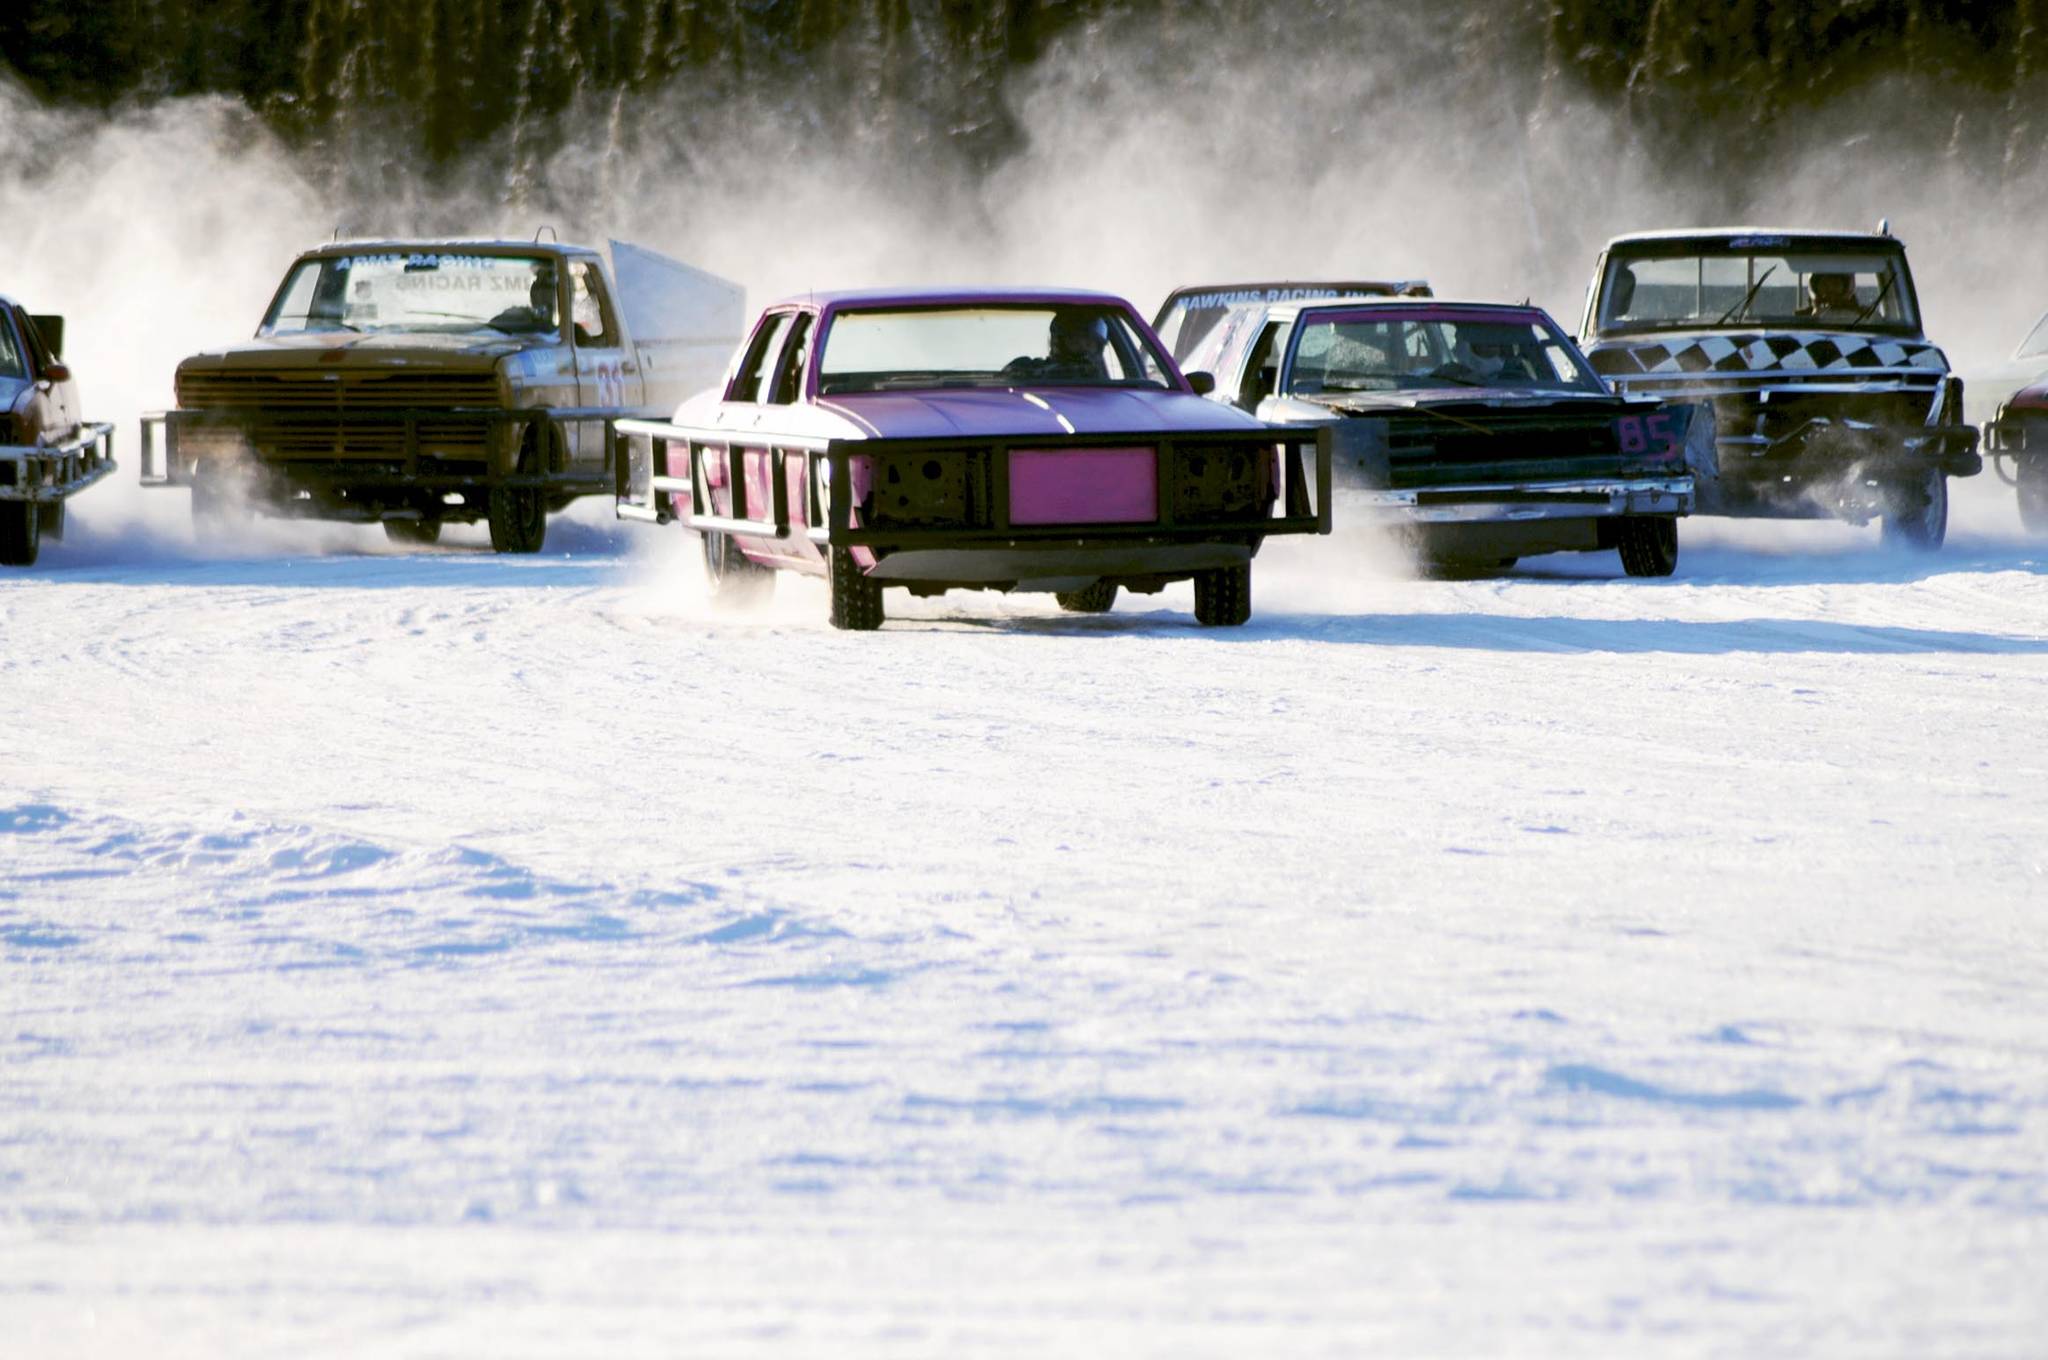 Drivers skid around one of the corners on the ice track atop a frozen lake at the Decanter Inn on Sunday, Jan. 22, 2018 in Kasilof, Alaska. Every Sunday in the winter, the Decanter Inn hosts Peninsula Ice Racing events for drivers to try their hand at the frozen track on the shallow lake at the bottom of the hill behind the inn. The racers can use studded tires on their front wheels only and equip the sides of their vehicles with bumpers as other vehicles are likely to slip and slide into them. Spinning out is common. A tow truck waits on the sidelines to retrieve drivers who get stuck on the berms alongside the track. Fans gathered Sunday despite the cold to cheer the racers on. The men race in the morning, followed by the women’s races in the afternoon. (Photo by Elizabeth Earl/Peninsula Clarion)